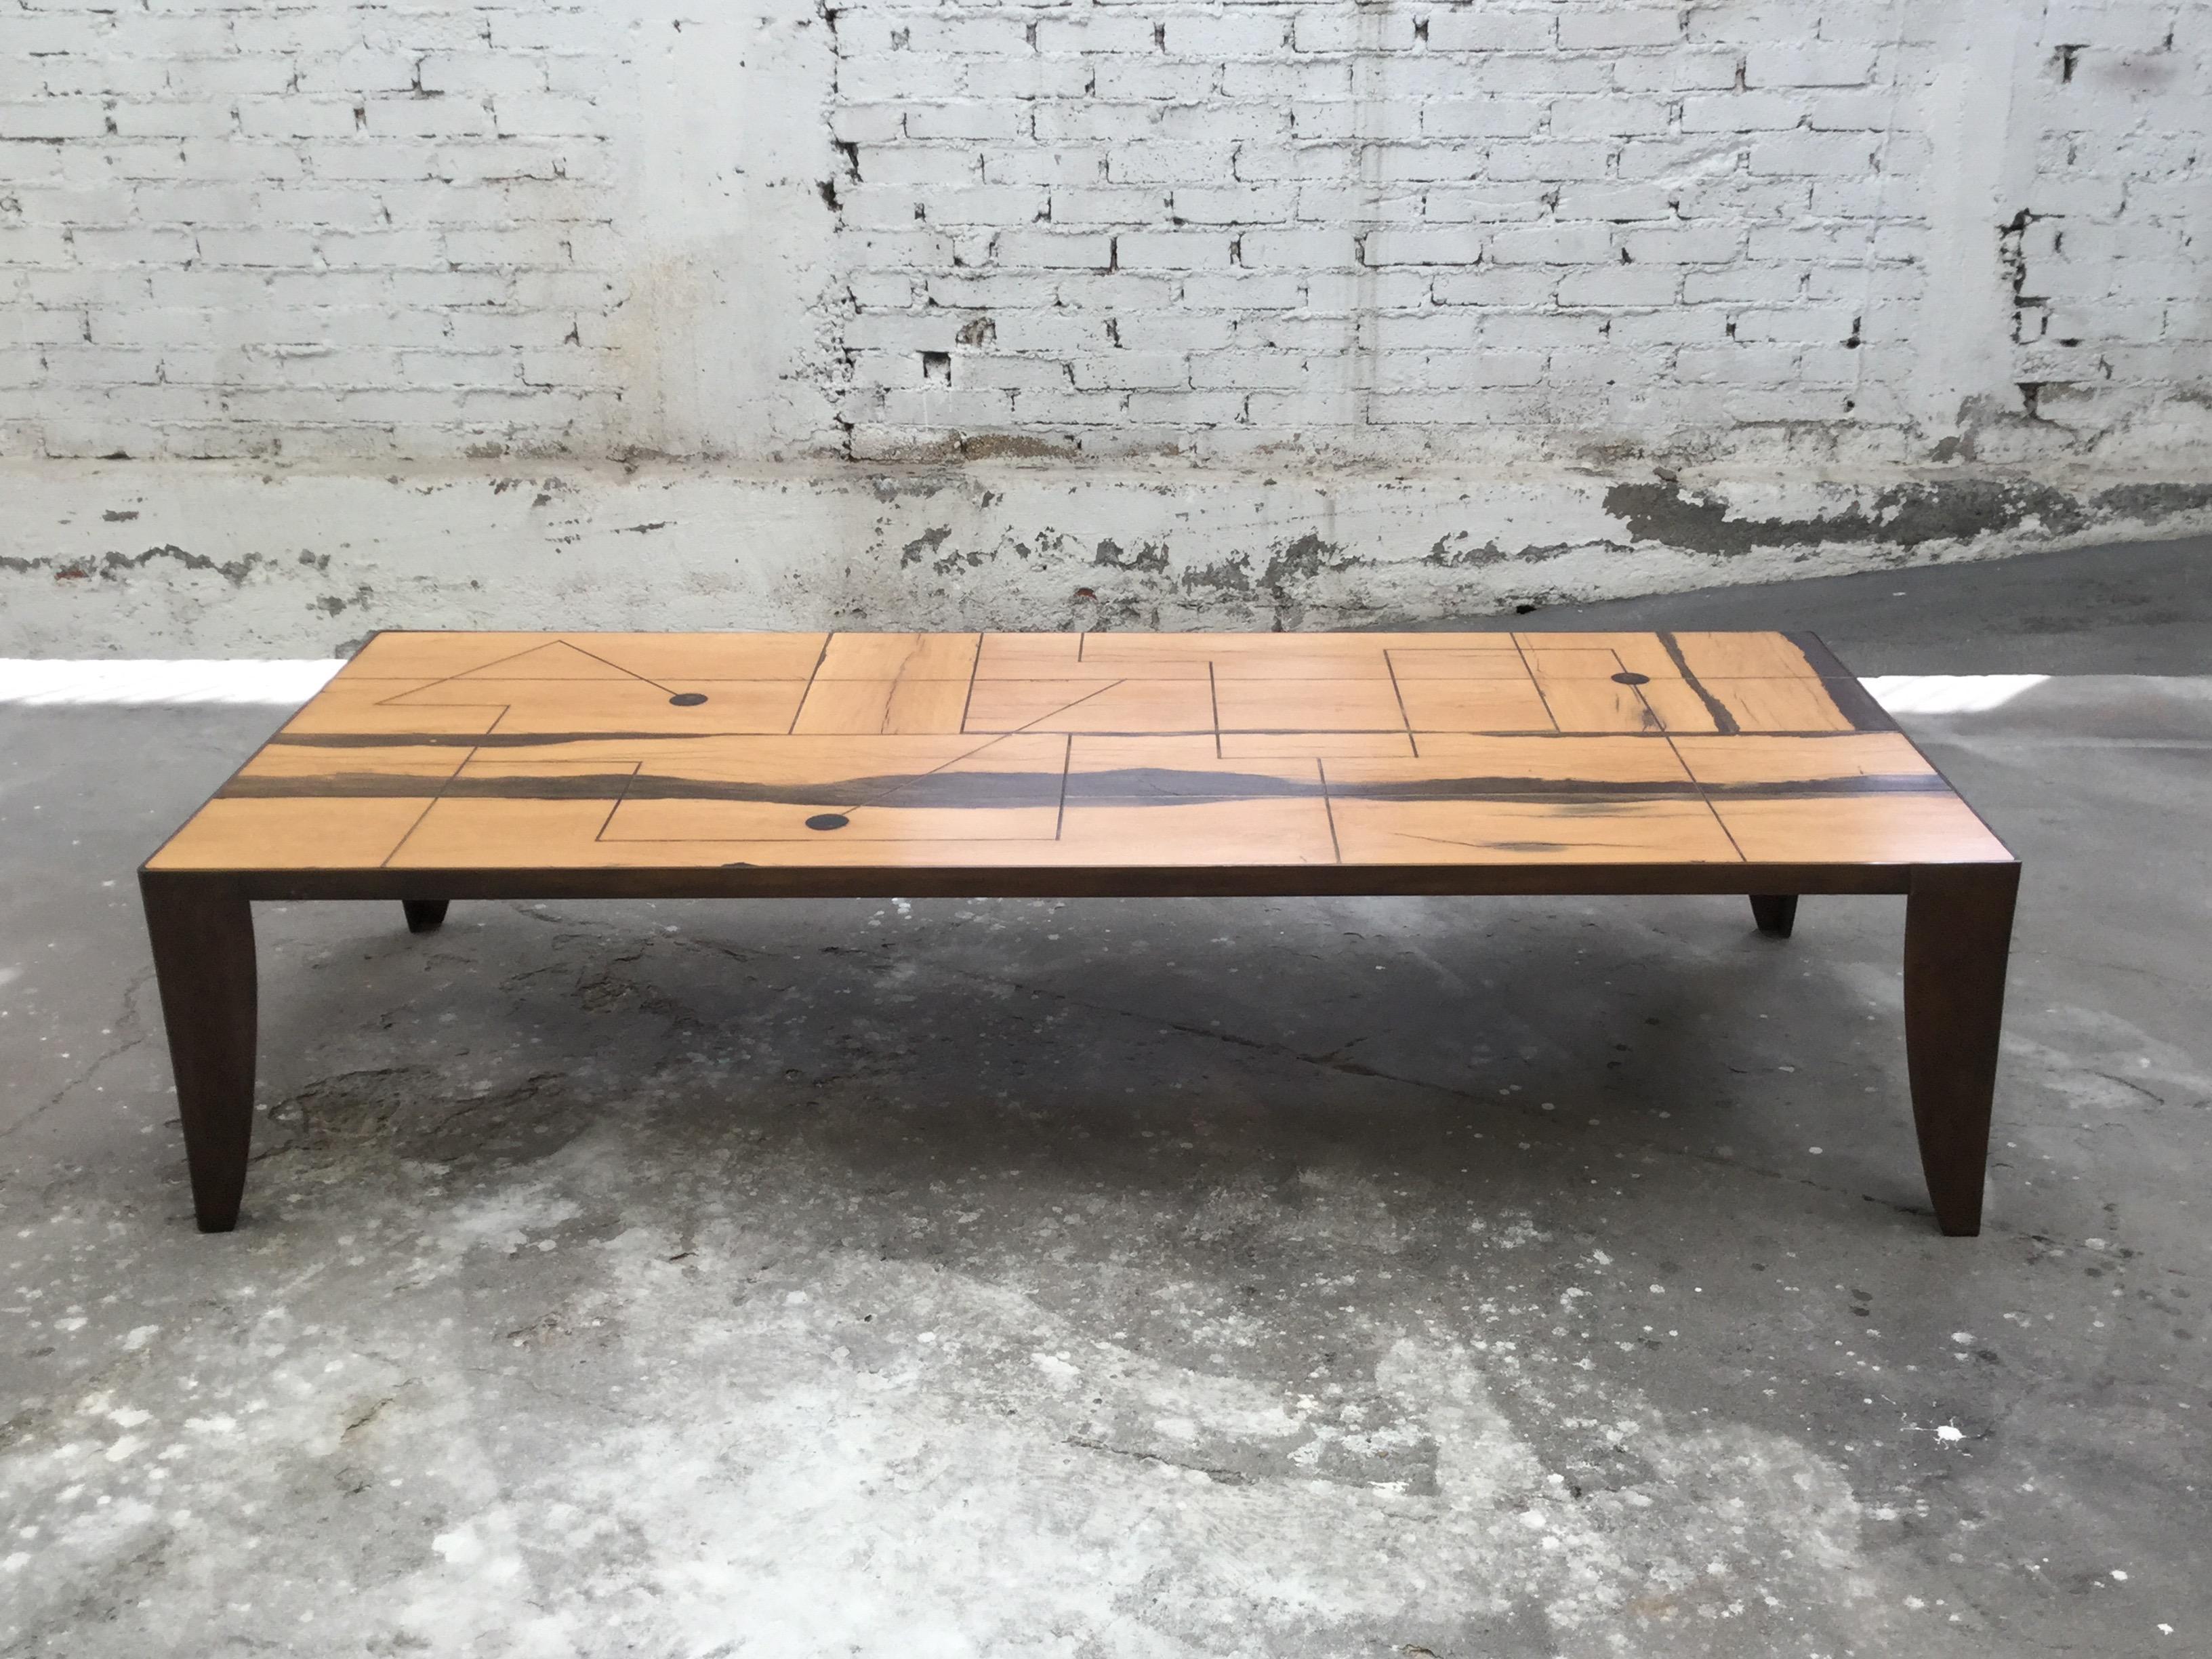 This one-of-a-kind coffee table has been constructed from antique railroad ties of tropical woods, somewhat plentiful a century ago but today a rare find. 
cut and set in bronze legs in the lost wax method, the brass inlay work interplays with the